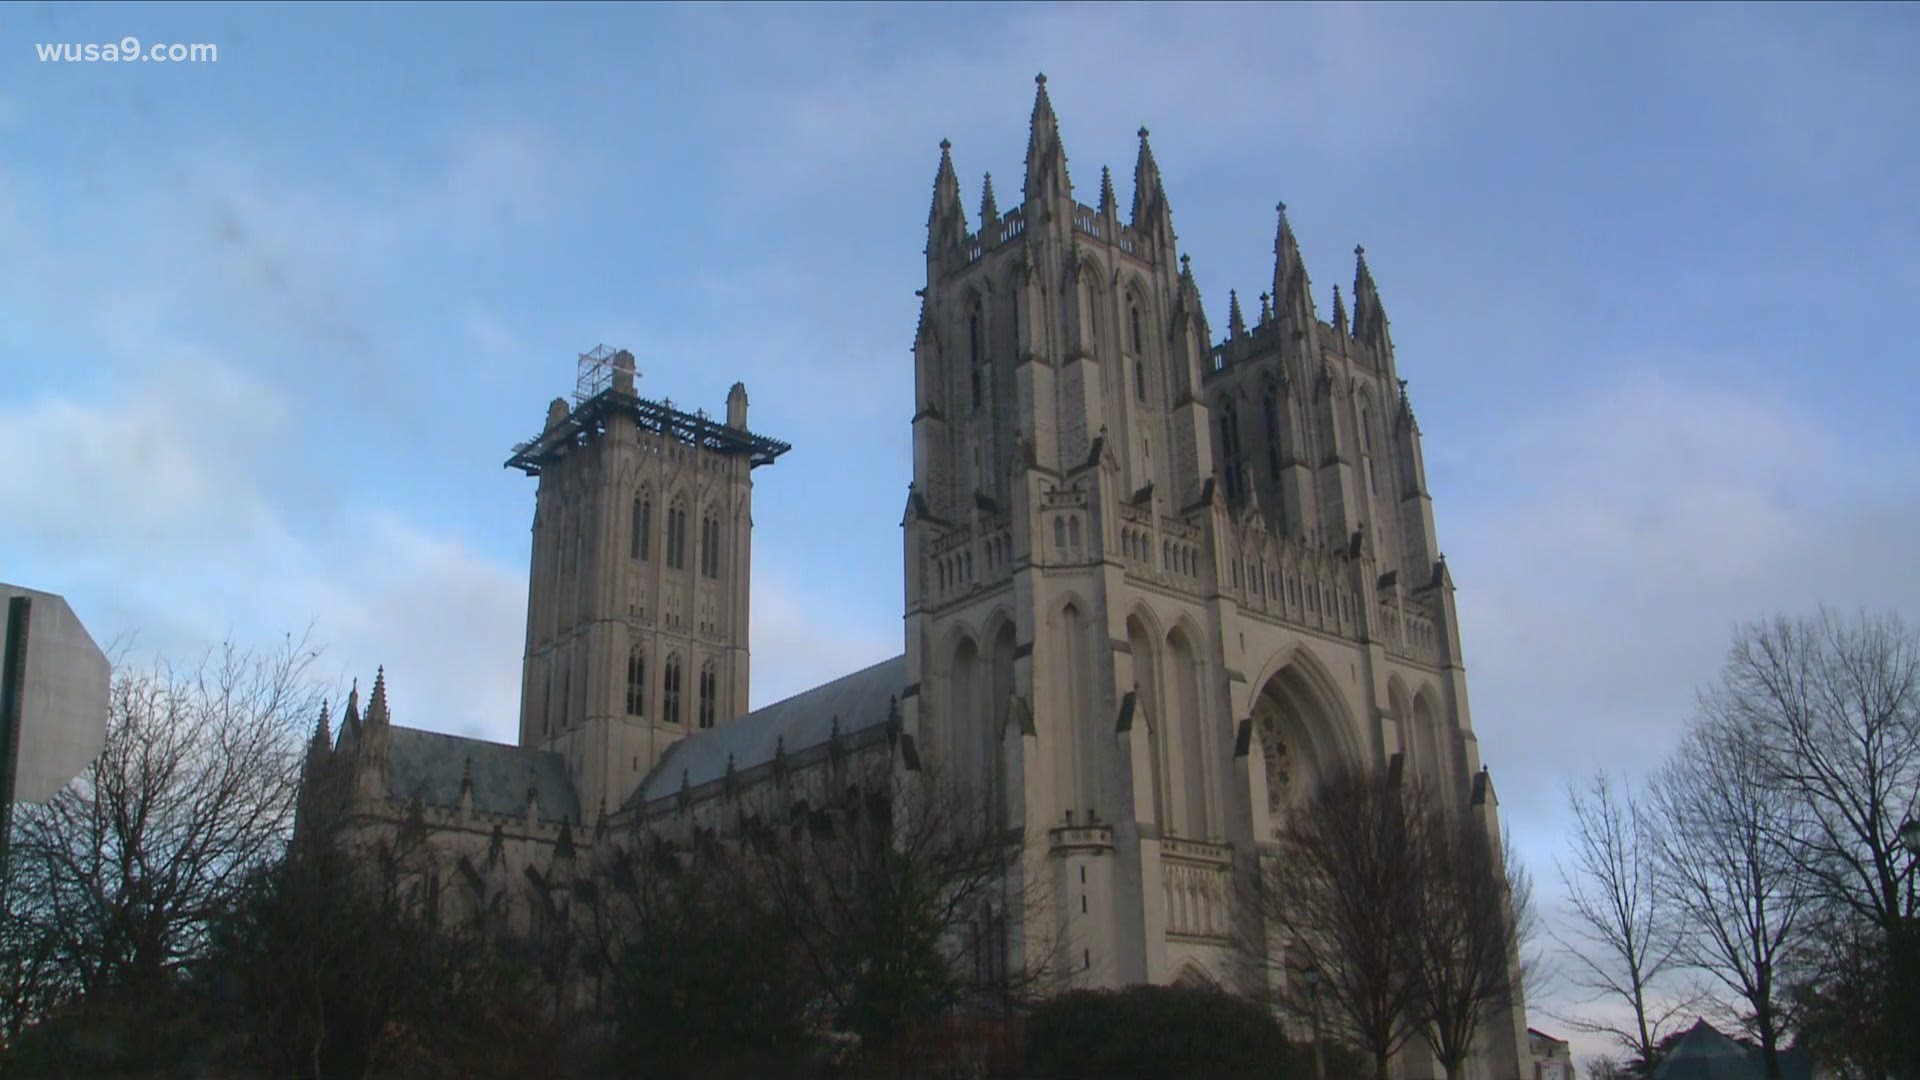 The coronavirus death toll in the United States reached 500,000 people. The National Cathedral rings its bells to honor the lives lost from COVID-19.